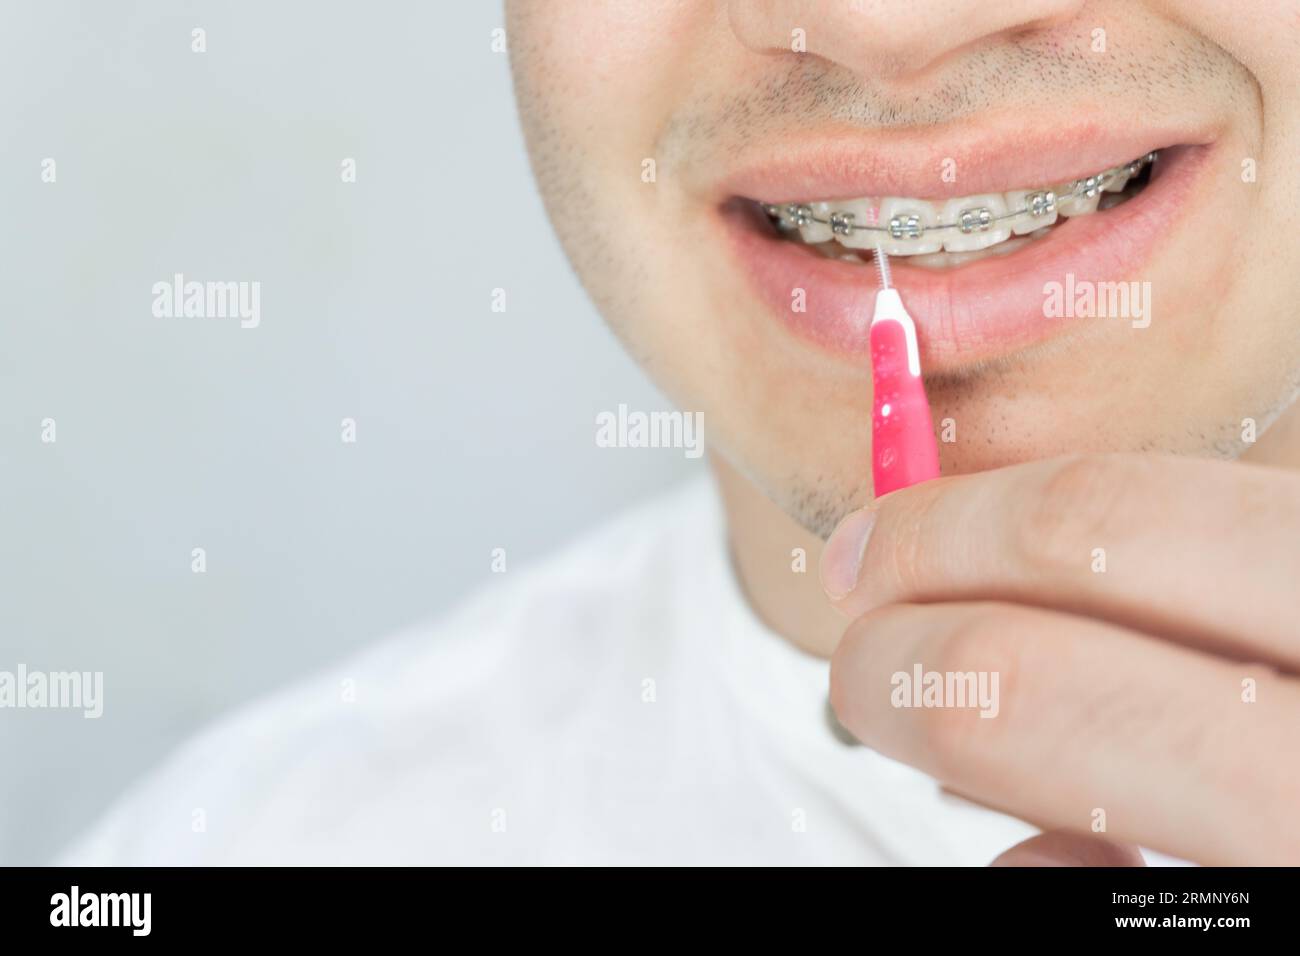 Handsome young man with beautiful white teeth with brackets cleaning his teeth with dental brush stick close up copy space. handsome young man with de Stock Photo